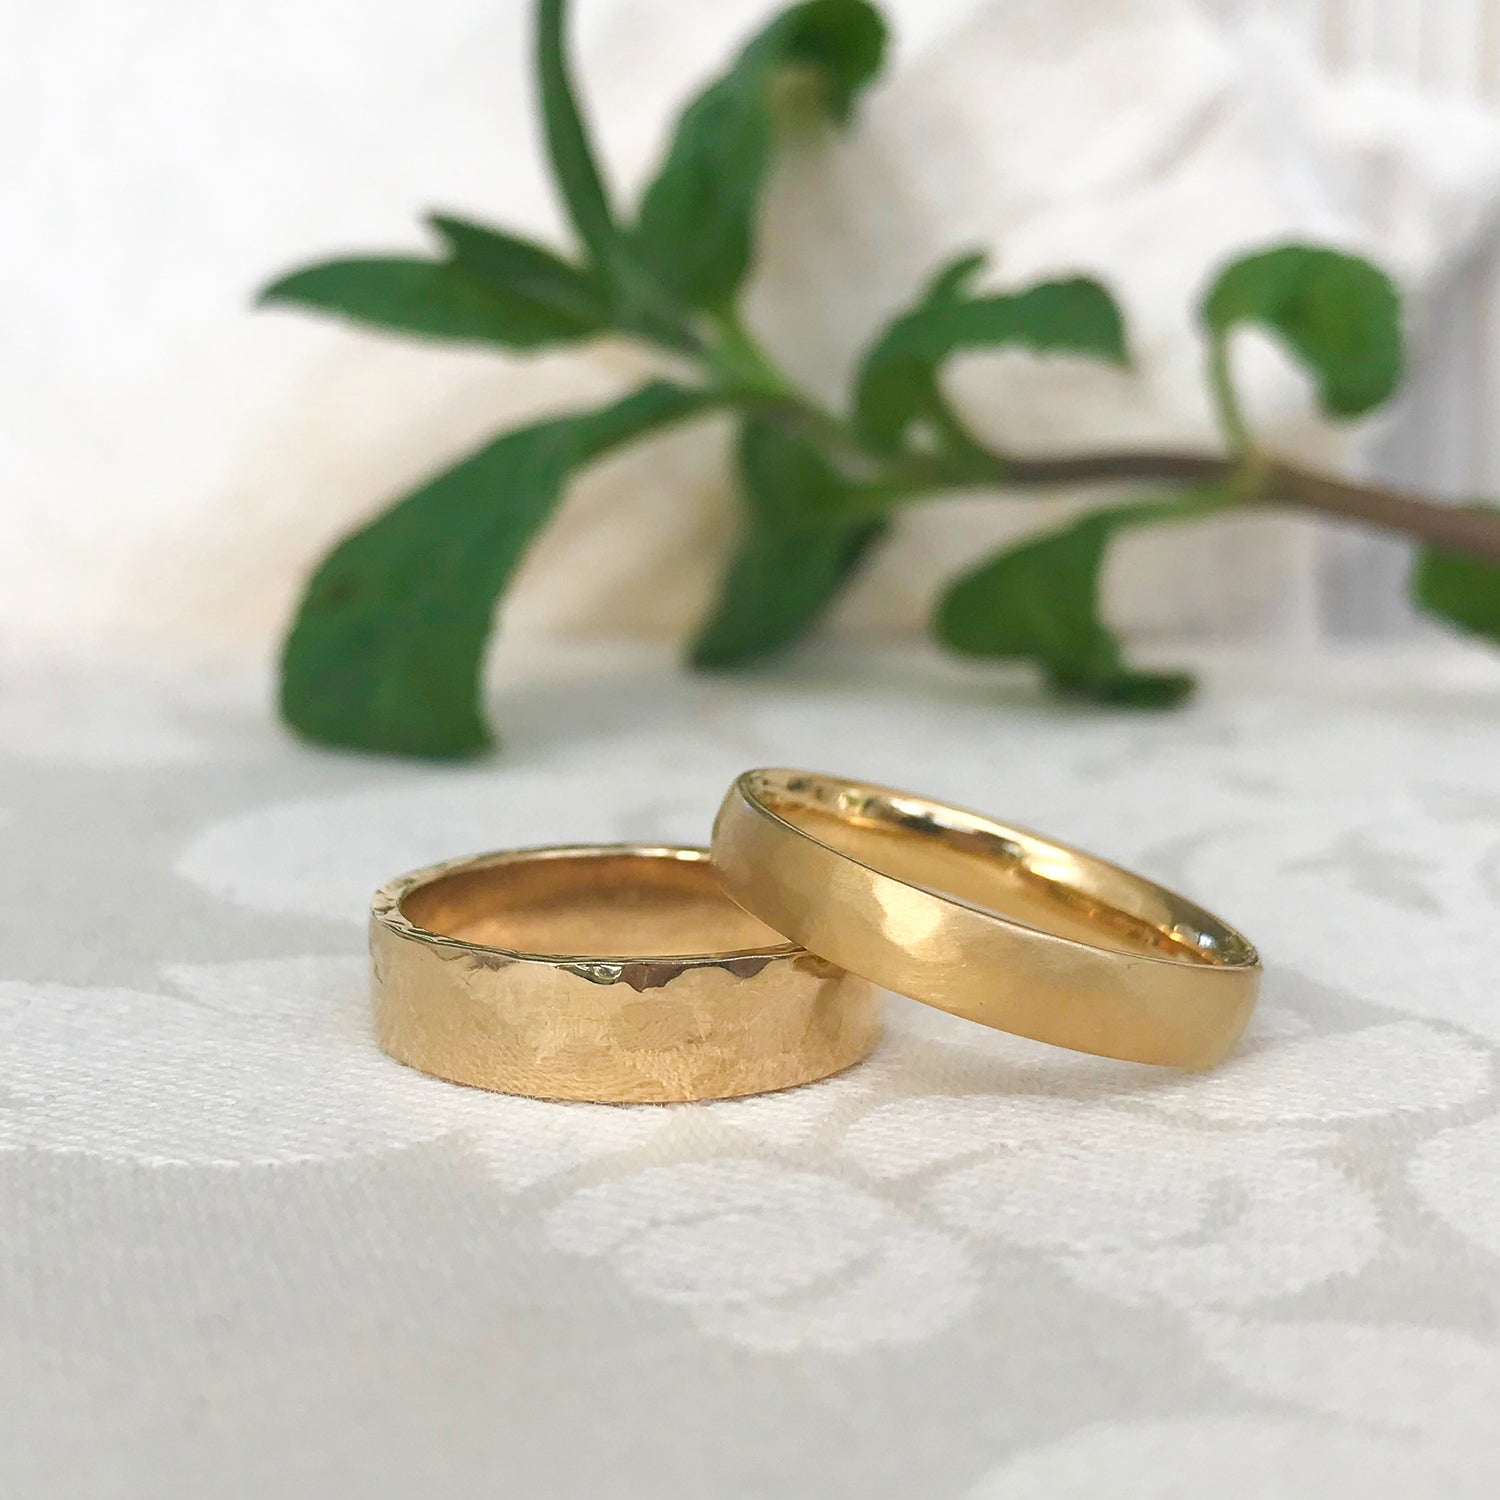 Ethical gold men's wedding bands with soft-hammered and hard-hammered finishes